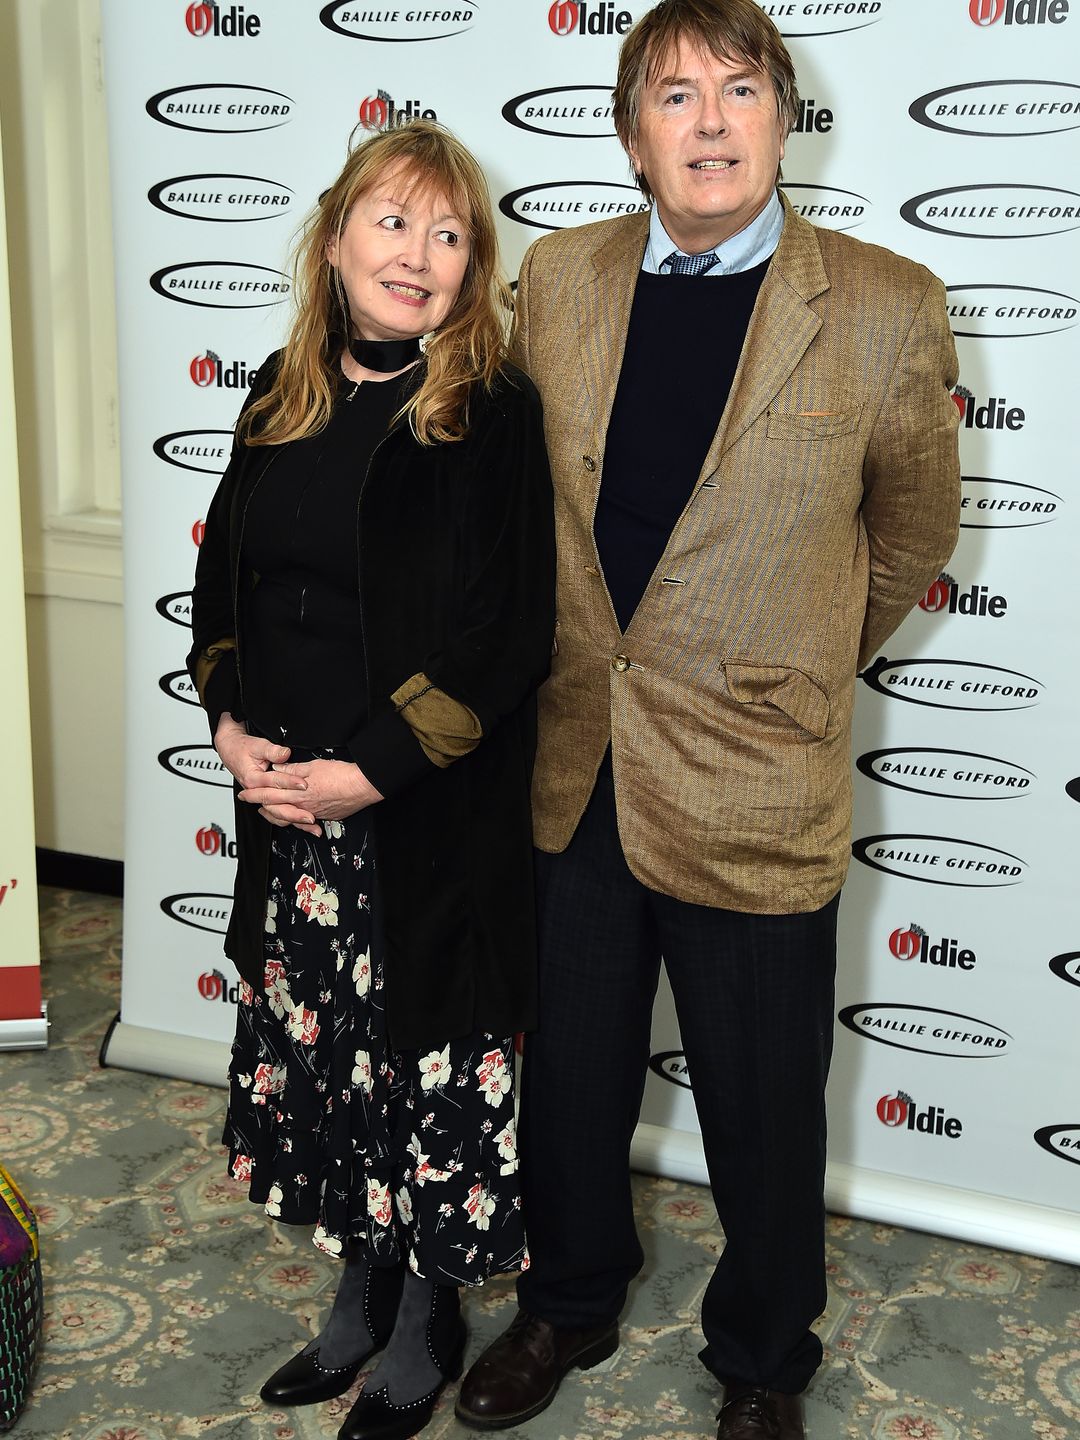 Giles Wood in a brown suit jacket and Mary Killen in a floral dress